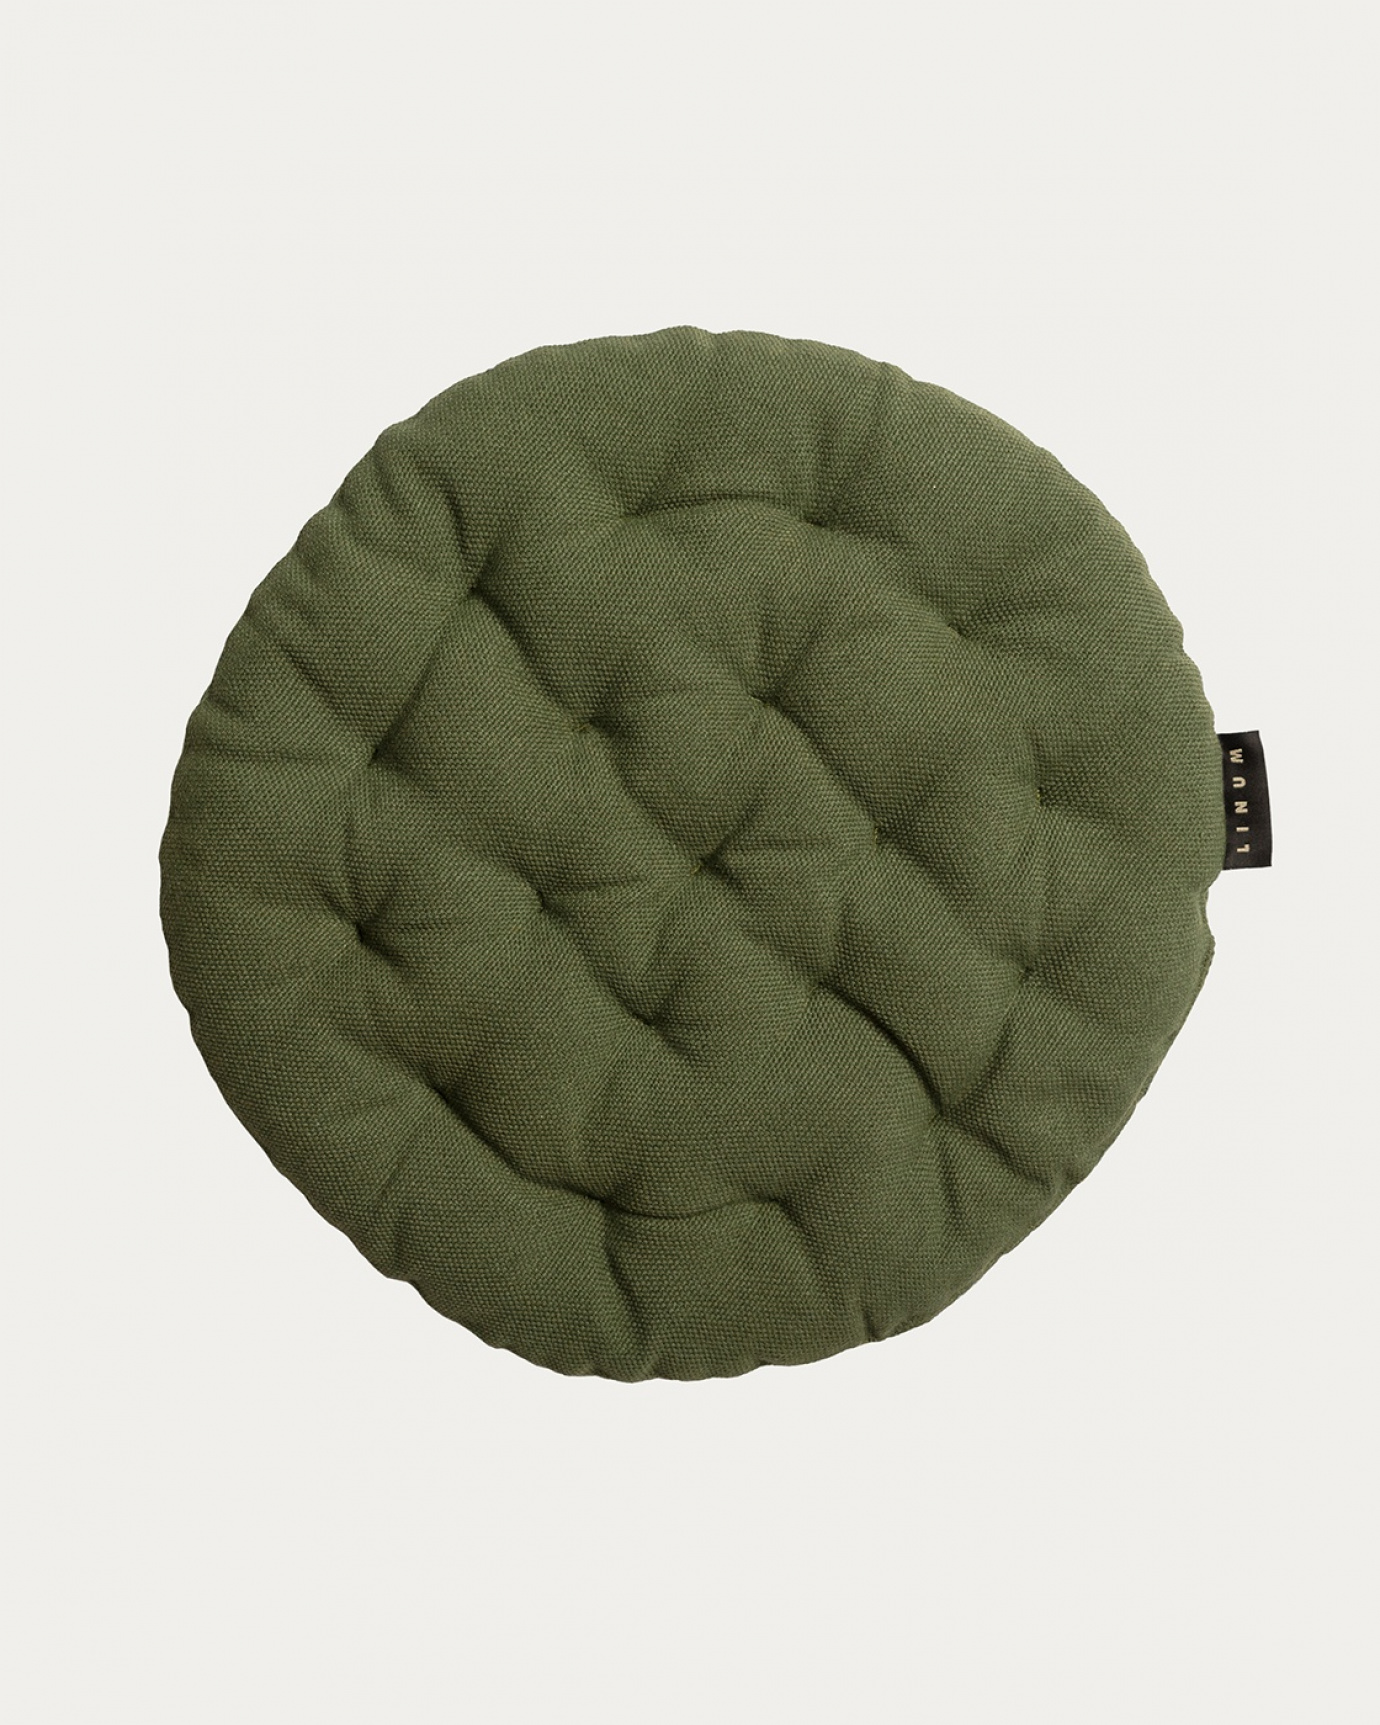 Product image dark olive green PEPPER seat cushion made of soft cotton with recycled polyester filling from LINUM DESIGN. Size ø37 cm.